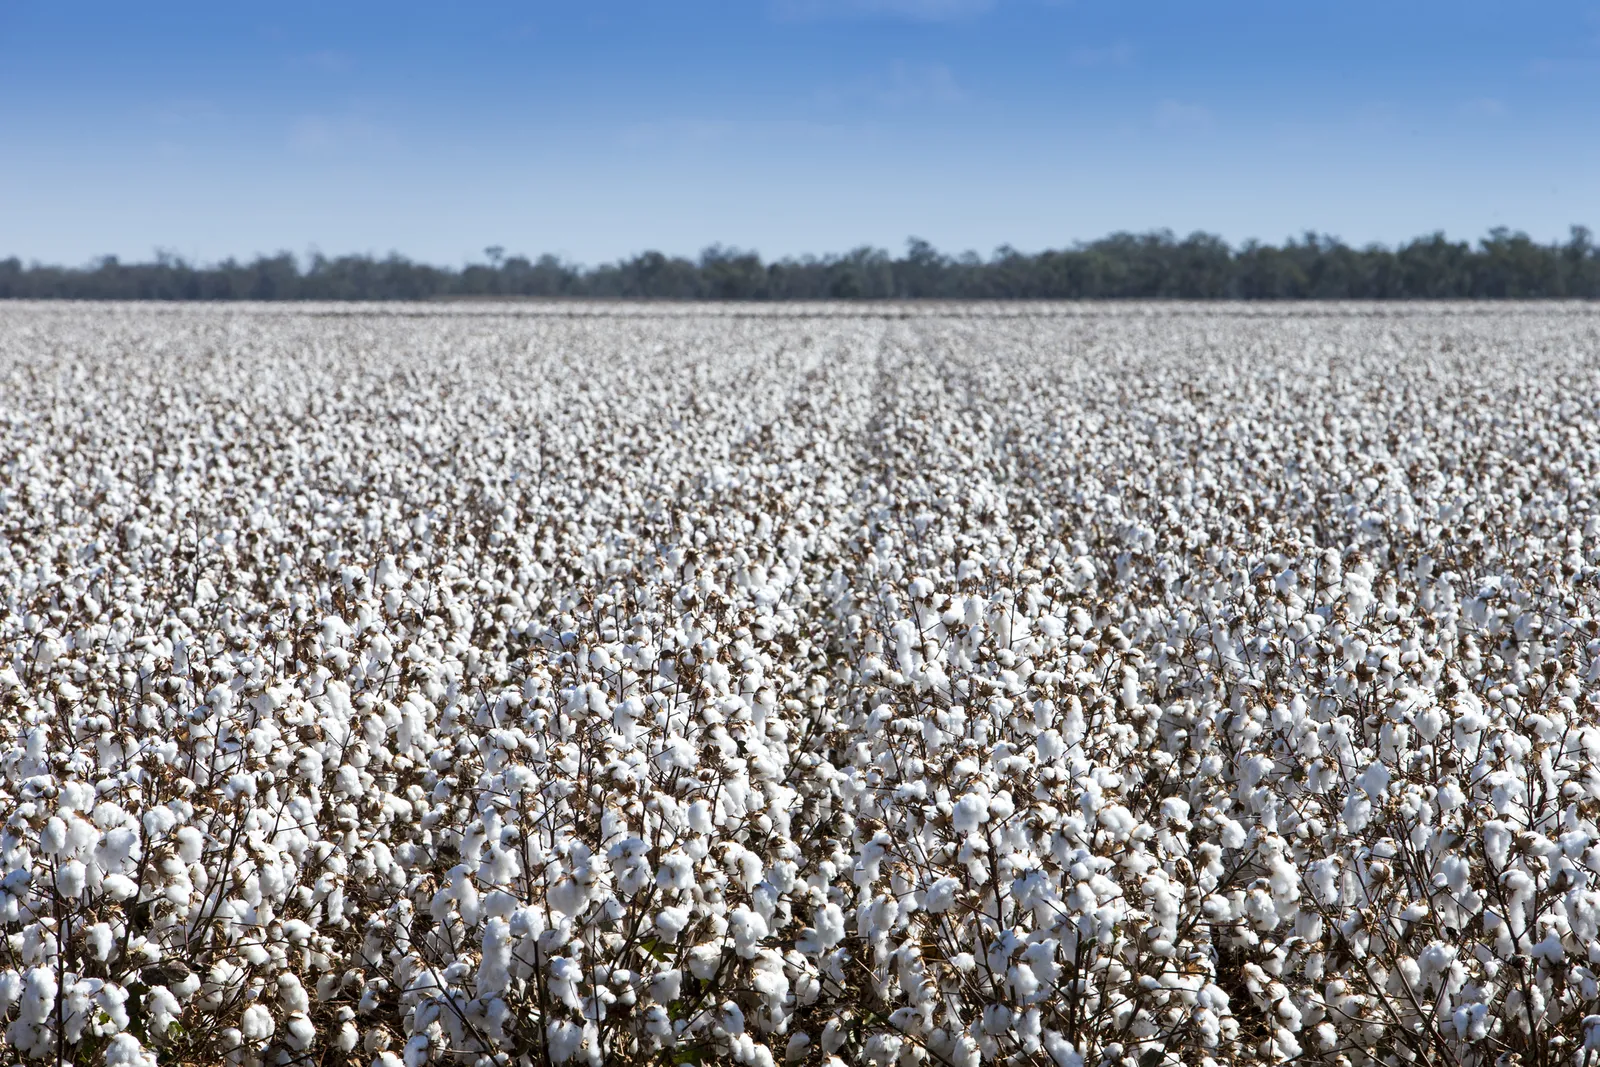 U.S. Cotton Growers Can Now Apply for the Climate Smart Cotton